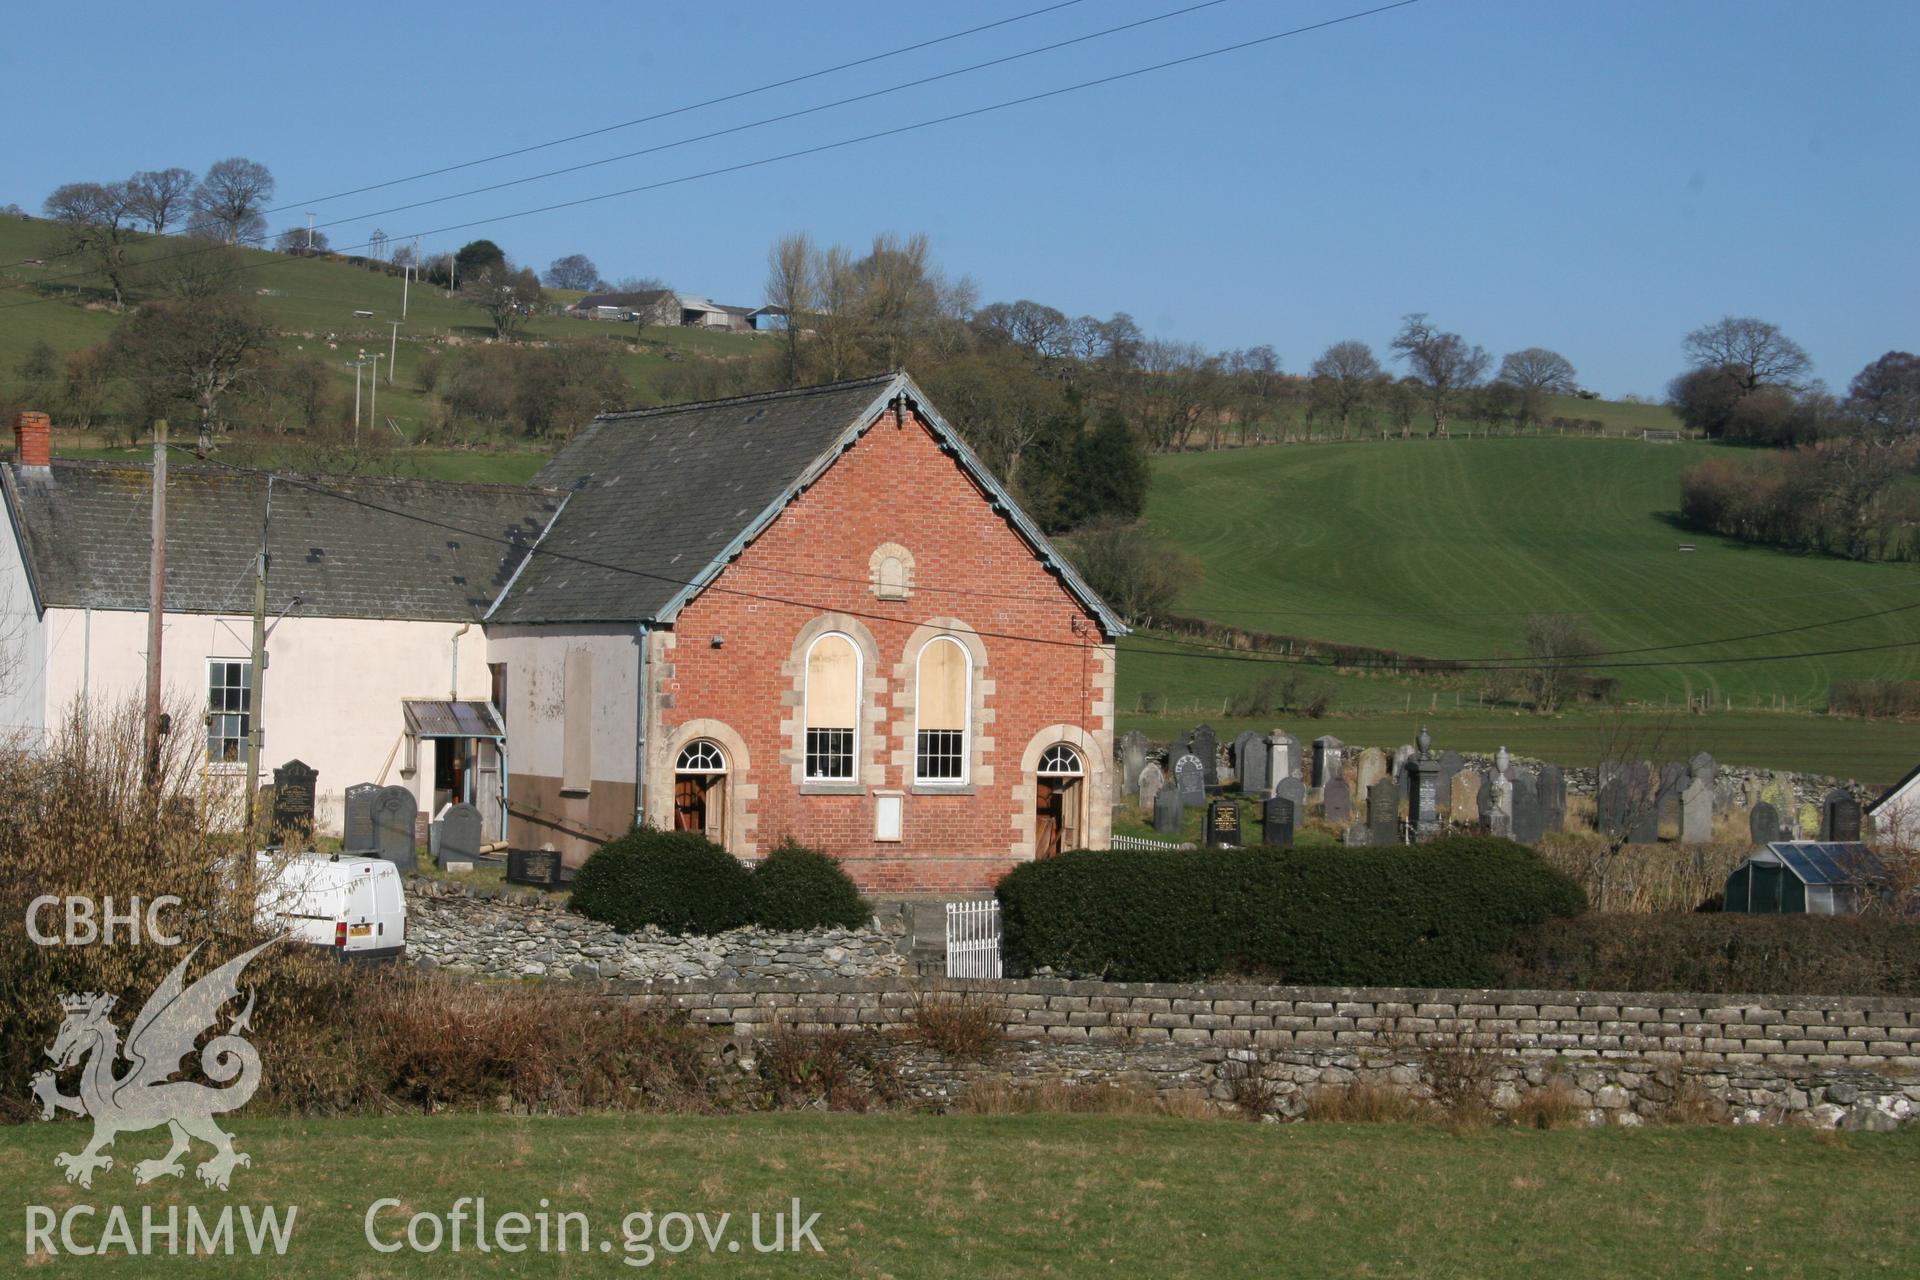 Photograph showing general exterior view of the front elevation of Llawrybettws Welsh Calvinistic Methodist chapel and graveyard, Glanyrafon, Corwen. Produced by Tim Allen on 27th February 2019 to meet a condition attached to planning application.